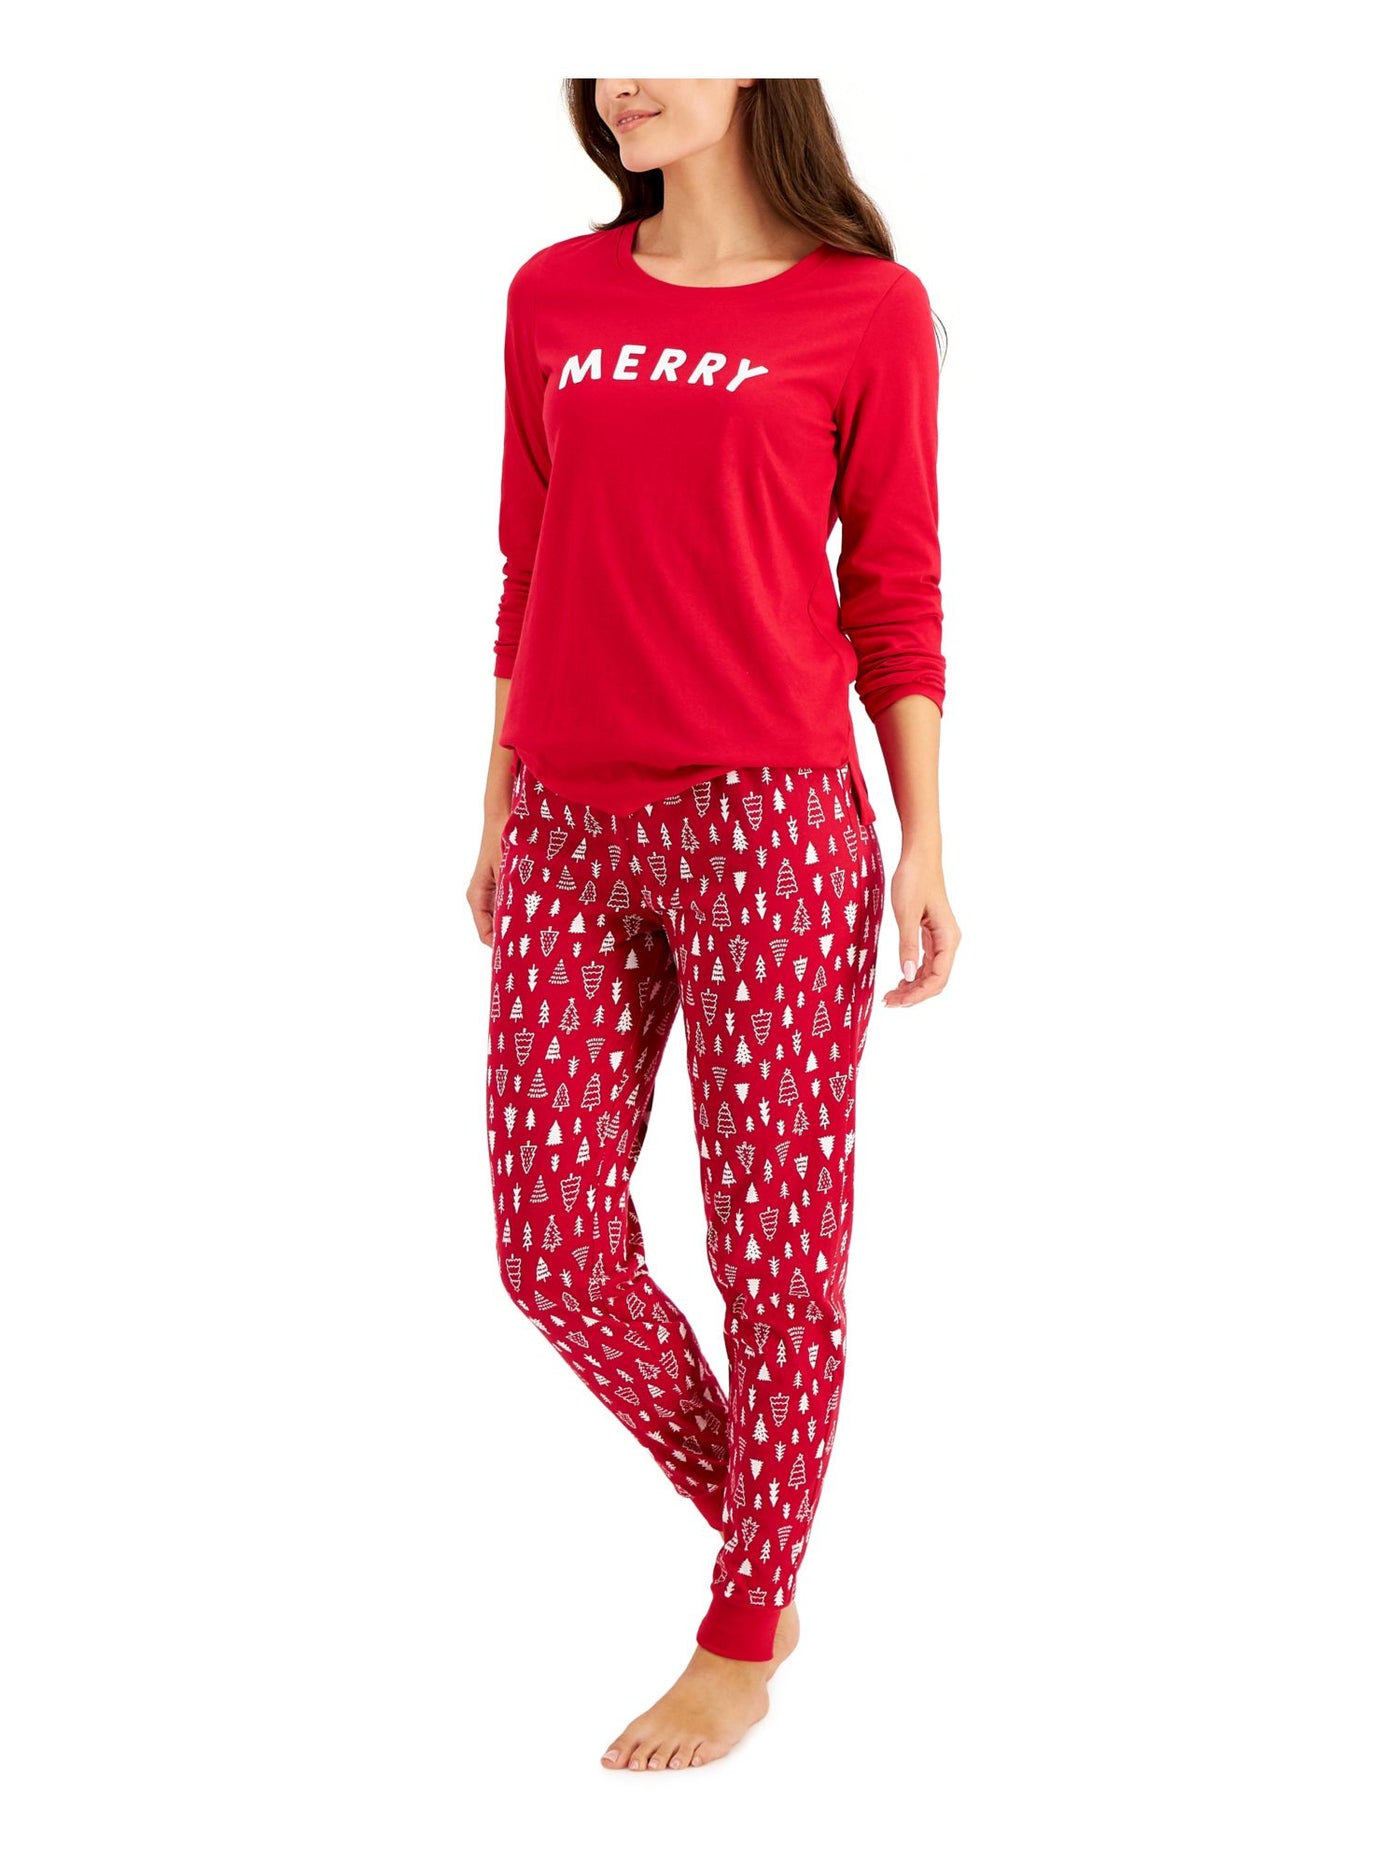 FAMILY PJs Womens Red Graphic Elastic Band T-Shirt Top Cuffed Pants Pajamas L